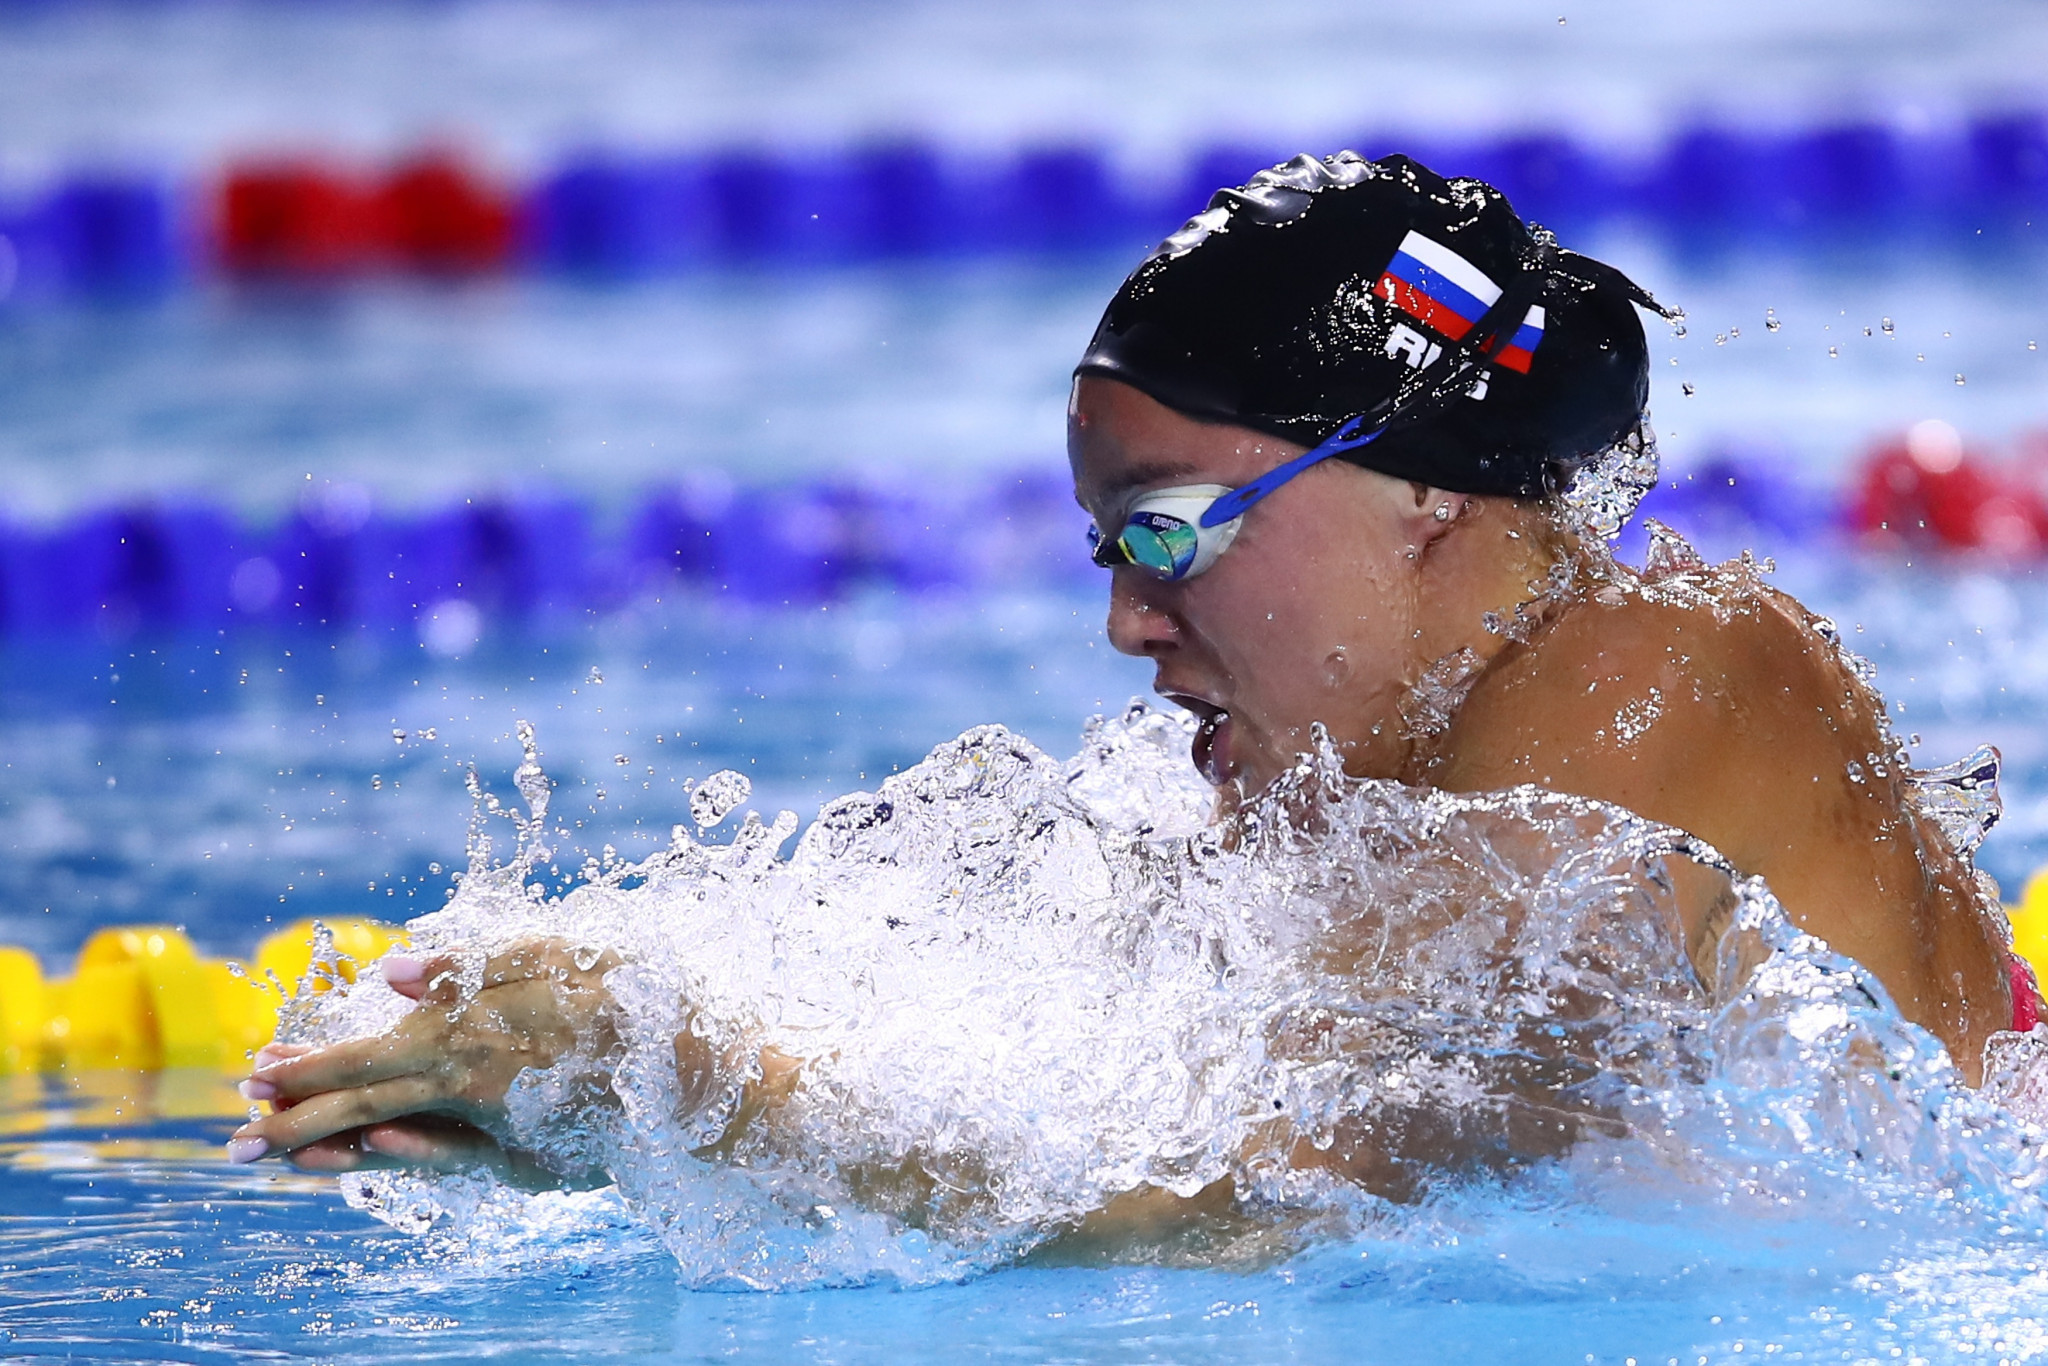 World Aquatics to make call on Russia participation "later in year" after differing views